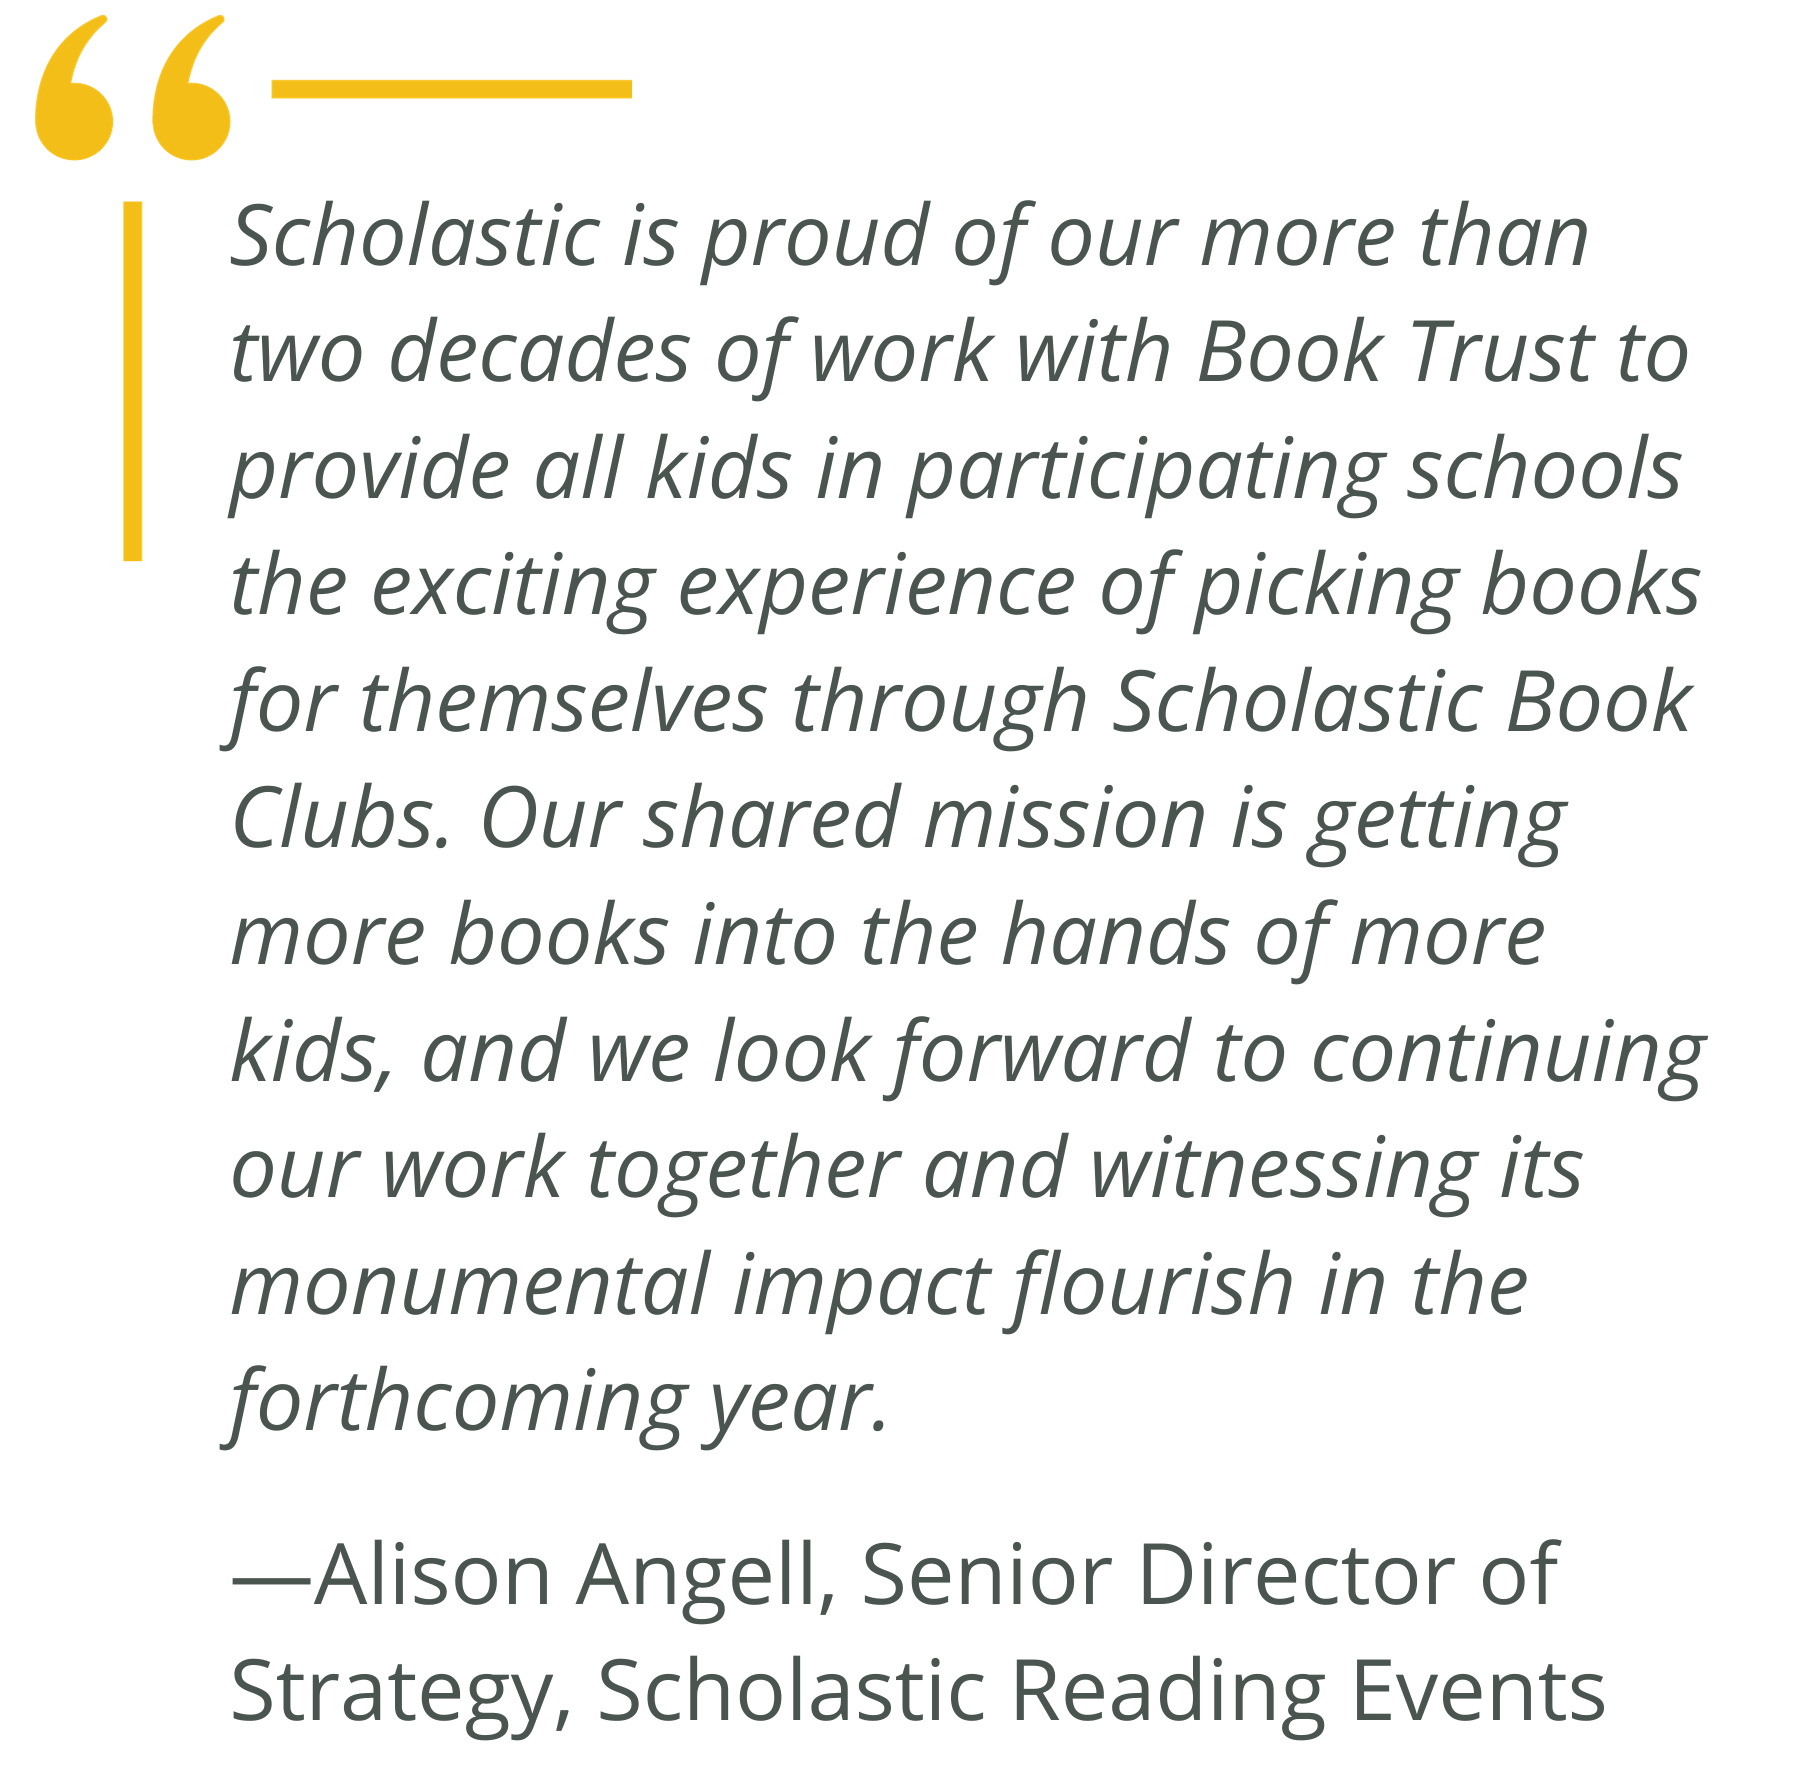 "Scholastic is proud of our more than two decades of work with Book Trust to provide all kids in participating schools the exciting experience of picking books for themselves through Scholastic Book Clubs. Our shared mission is getting more books into the hands of more kids, and we look forward to continuing our work together and witnessing its monumental impact flourish in the forthcoming year." —Alison Angell, Senior Director of Strategy, Scholastic Reading Events